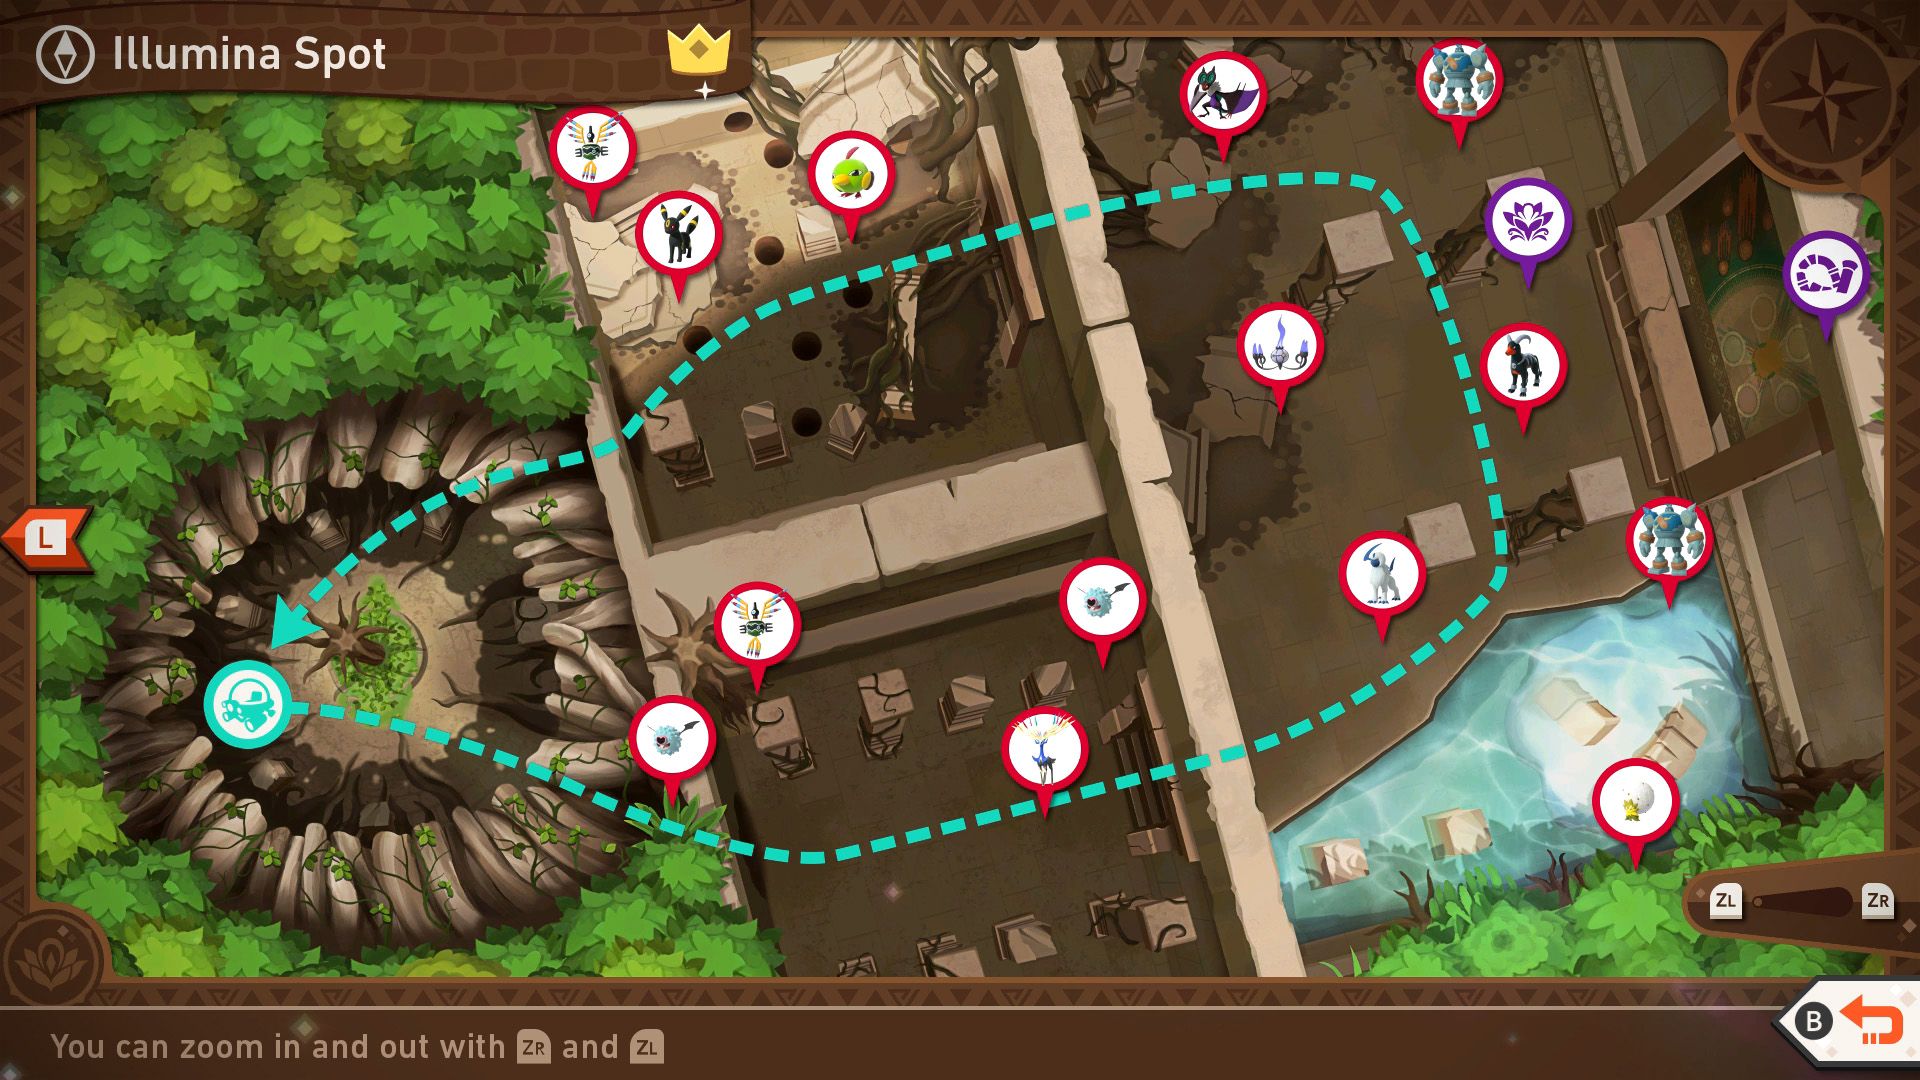 A complete map of the Aurus Island Illumina Spot course in New Pokemon Snap